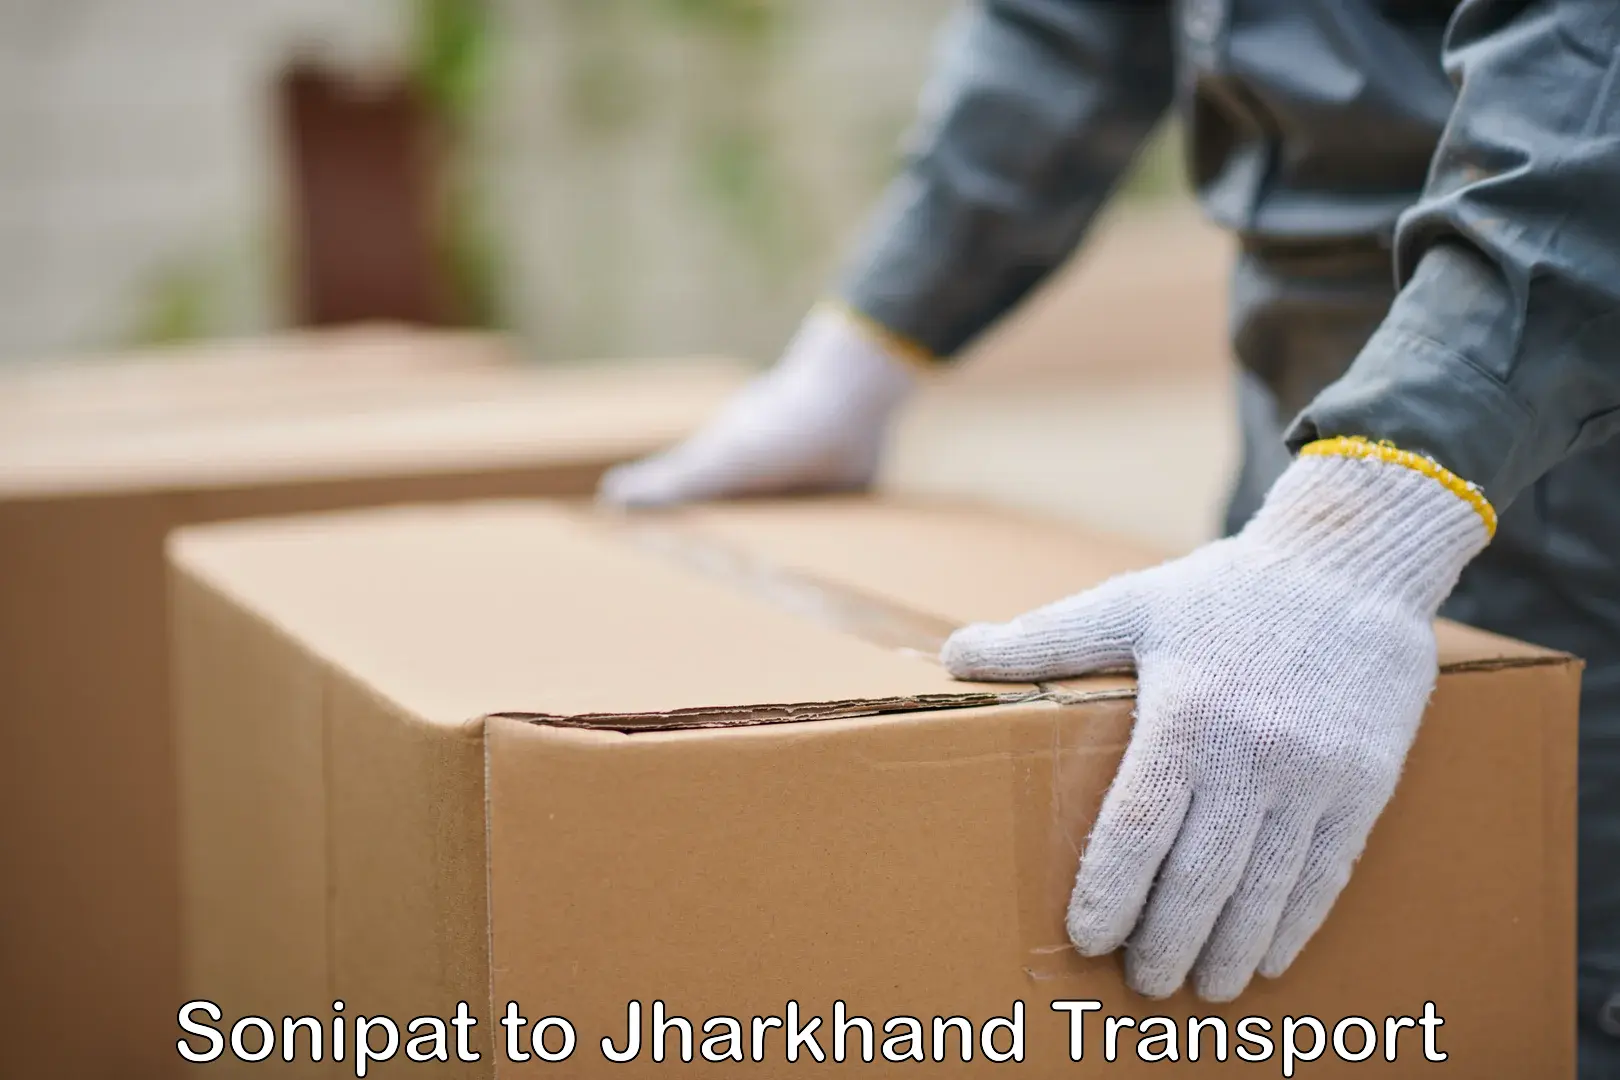 Delivery service Sonipat to Hazaribagh